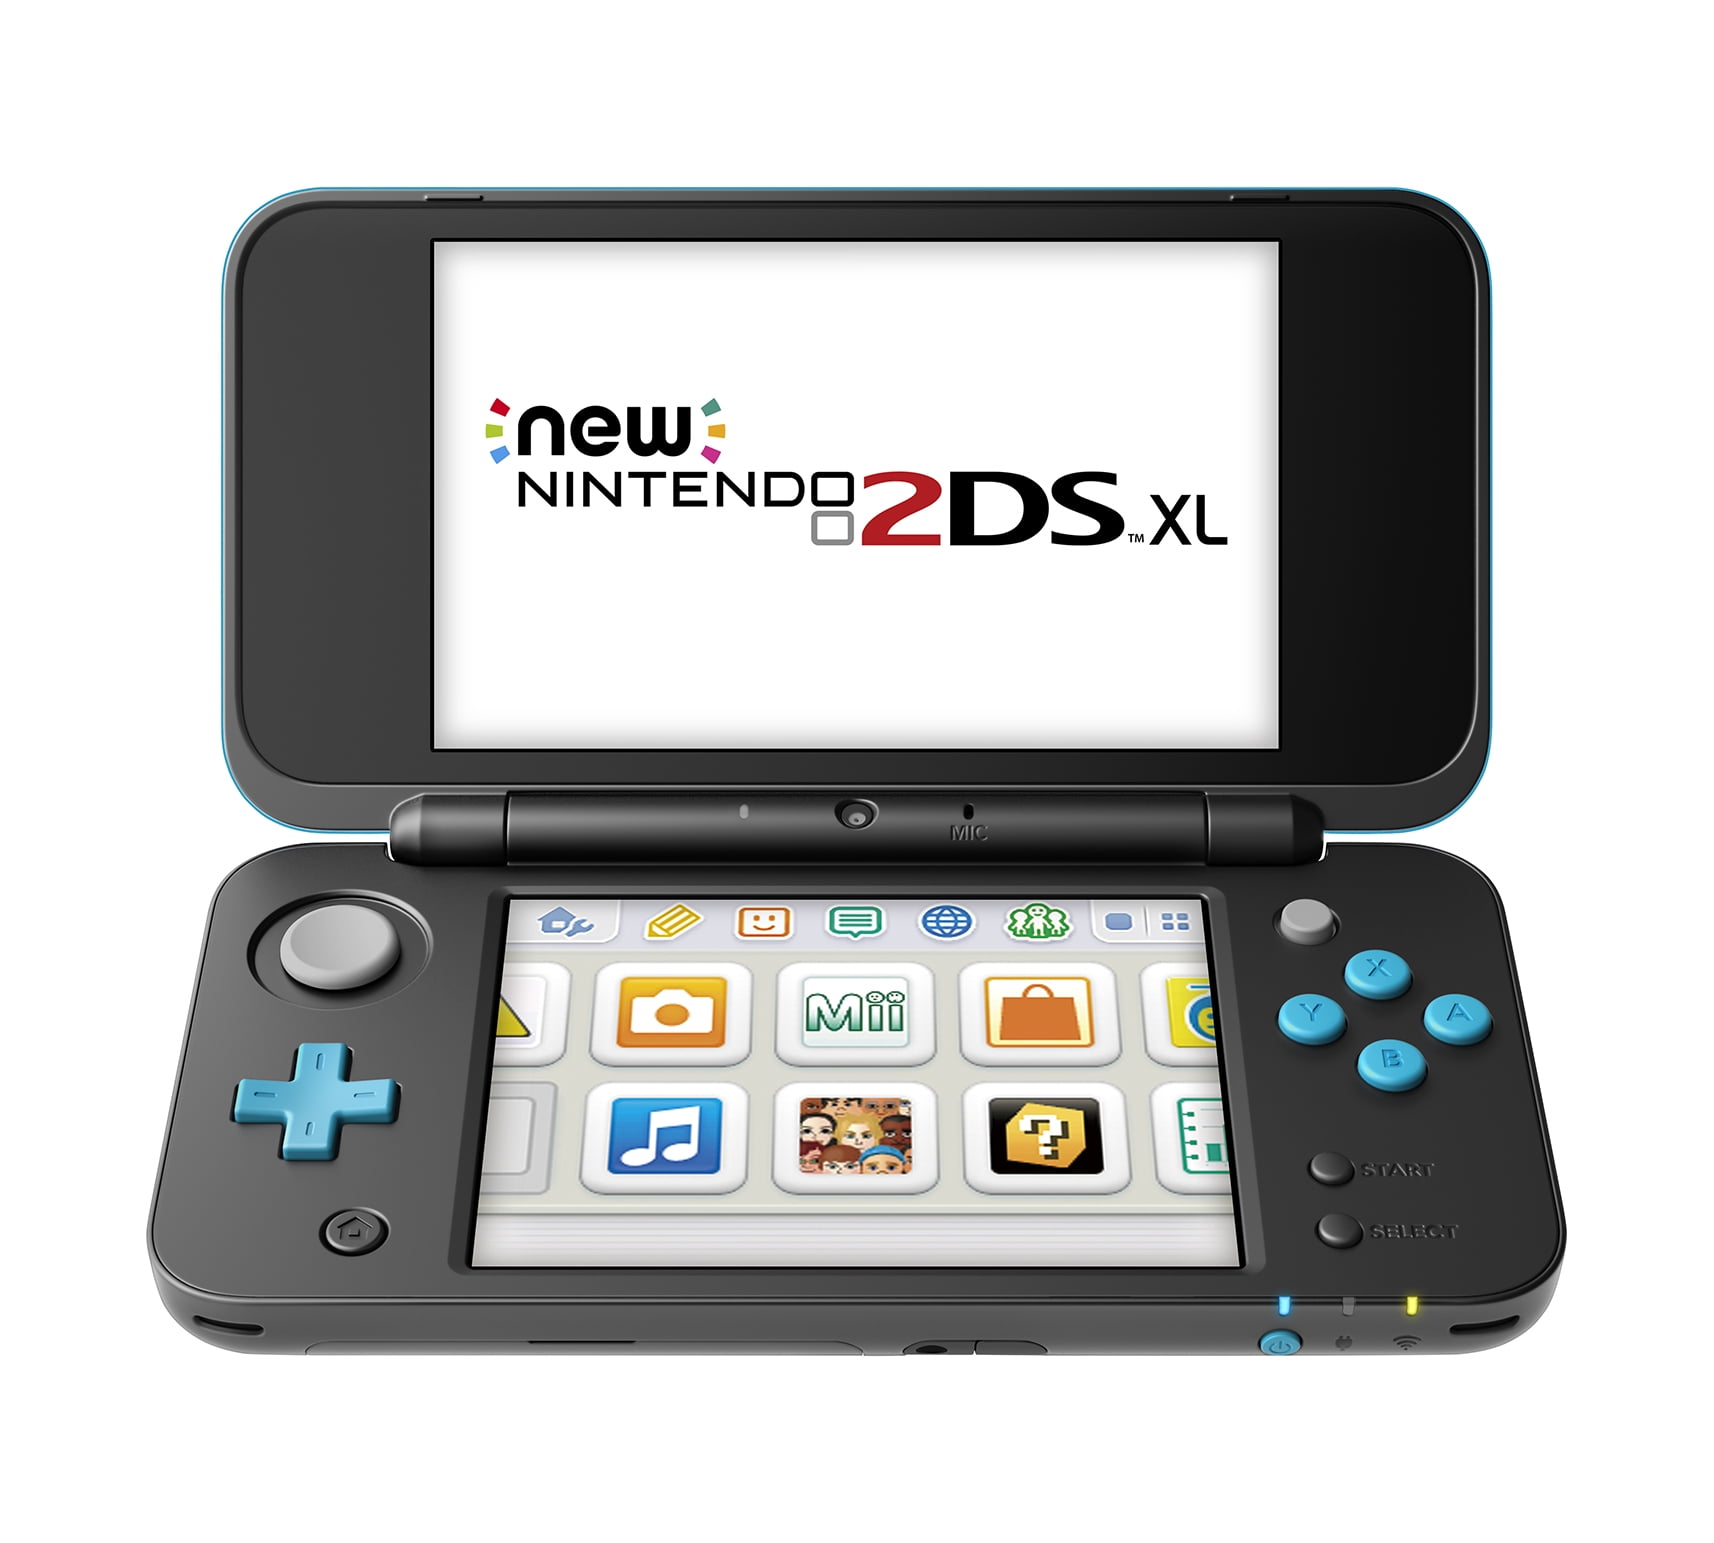 New Nintendo 2DS XL System w/ Mario Kart 7 Pre-installed, Black & Turquoise